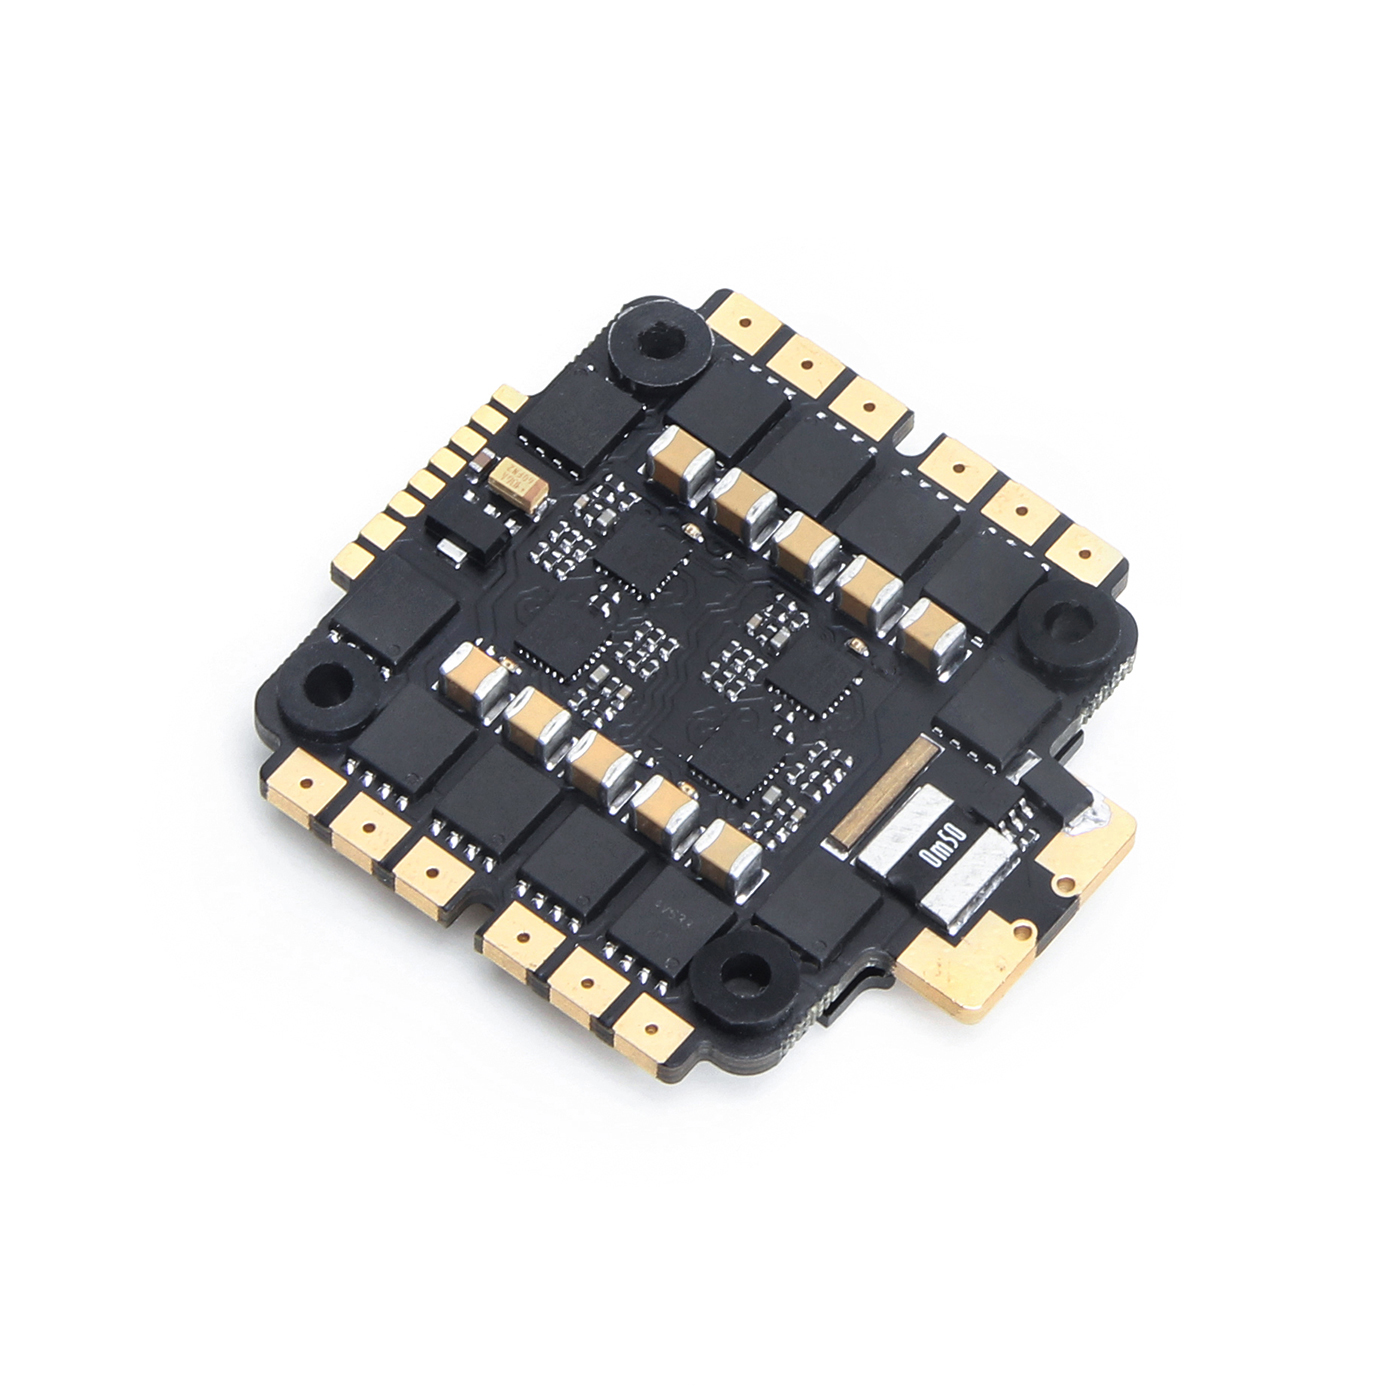 MAD BL-32 60A 4IN1 6S 64MHZ ESC Regulator for the FPV drone